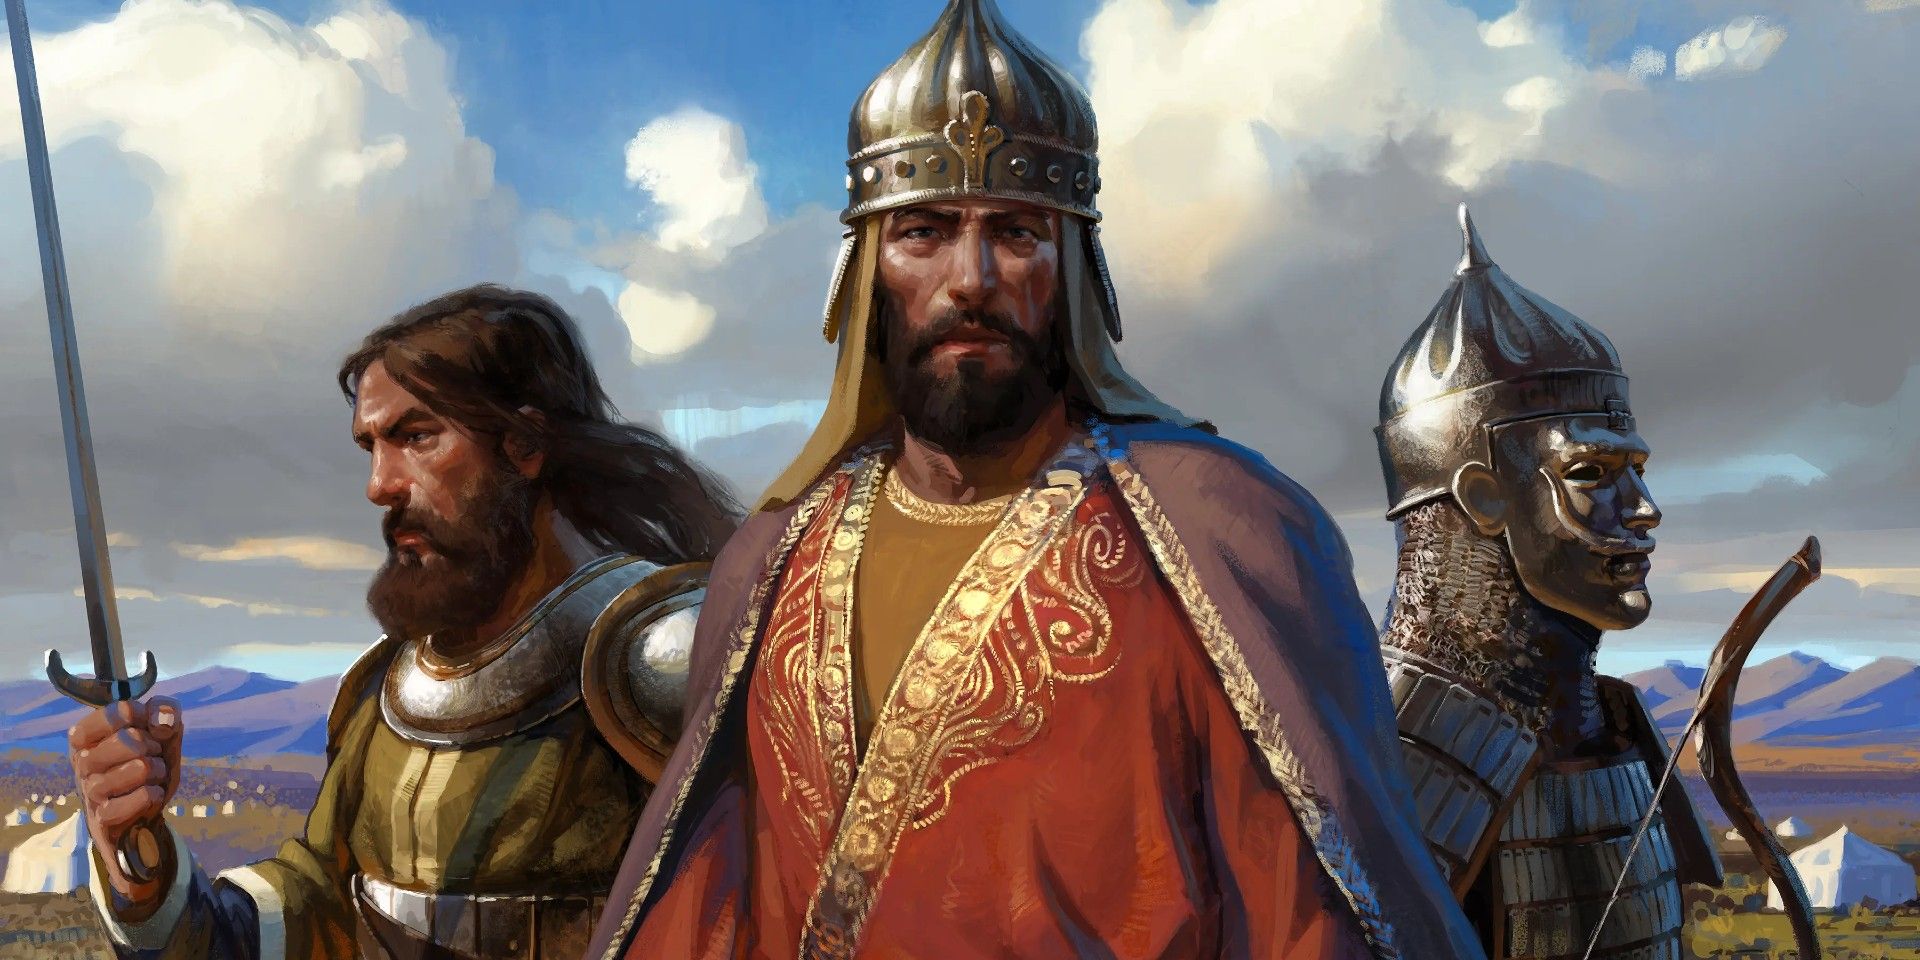 Age of Empires promo art showing 3 leaders.